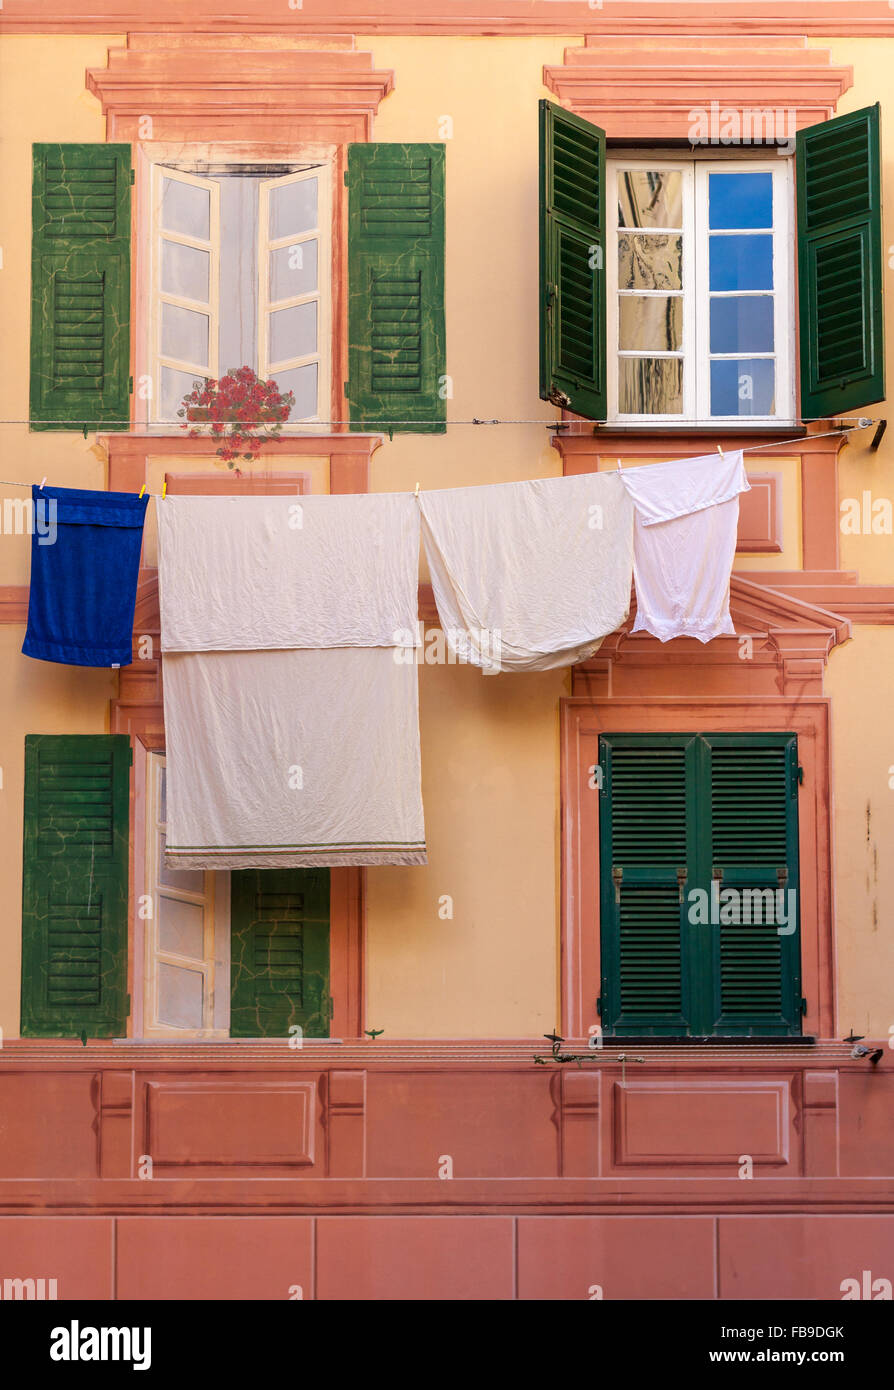 Shutters, fake windows and clothes hanging on a mediterranean facade Stock Photo